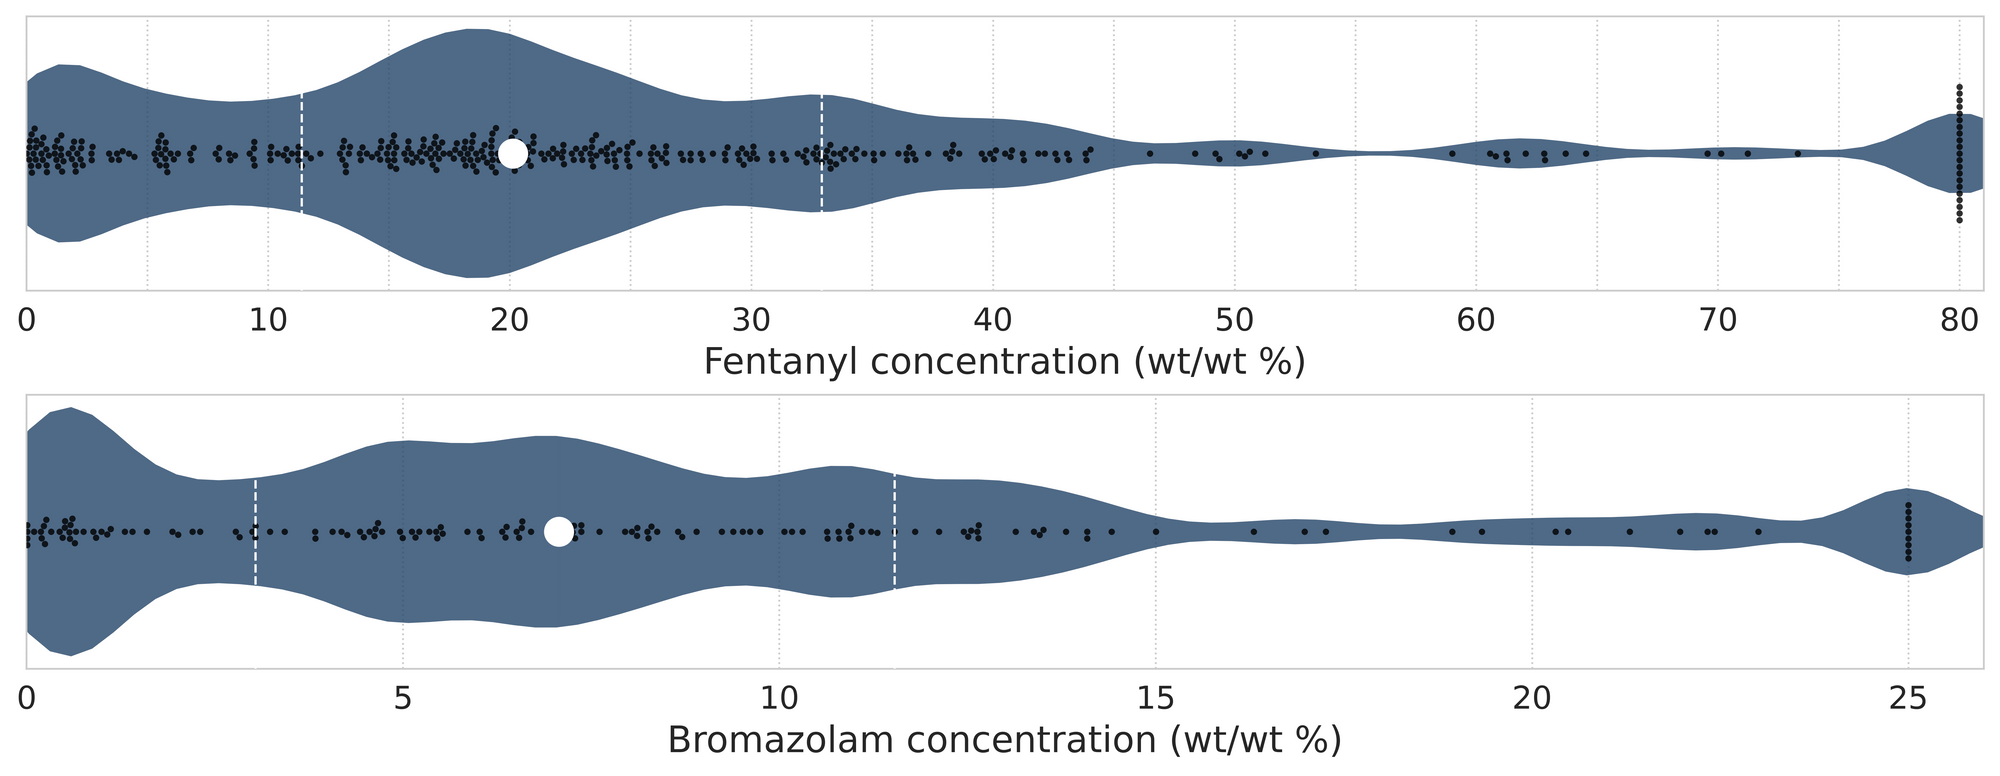 Figure 4. Violin plots of fentanyl (top panel) and bromazolam (bottom) positive samples quantified during April across all collection locations/methods. 